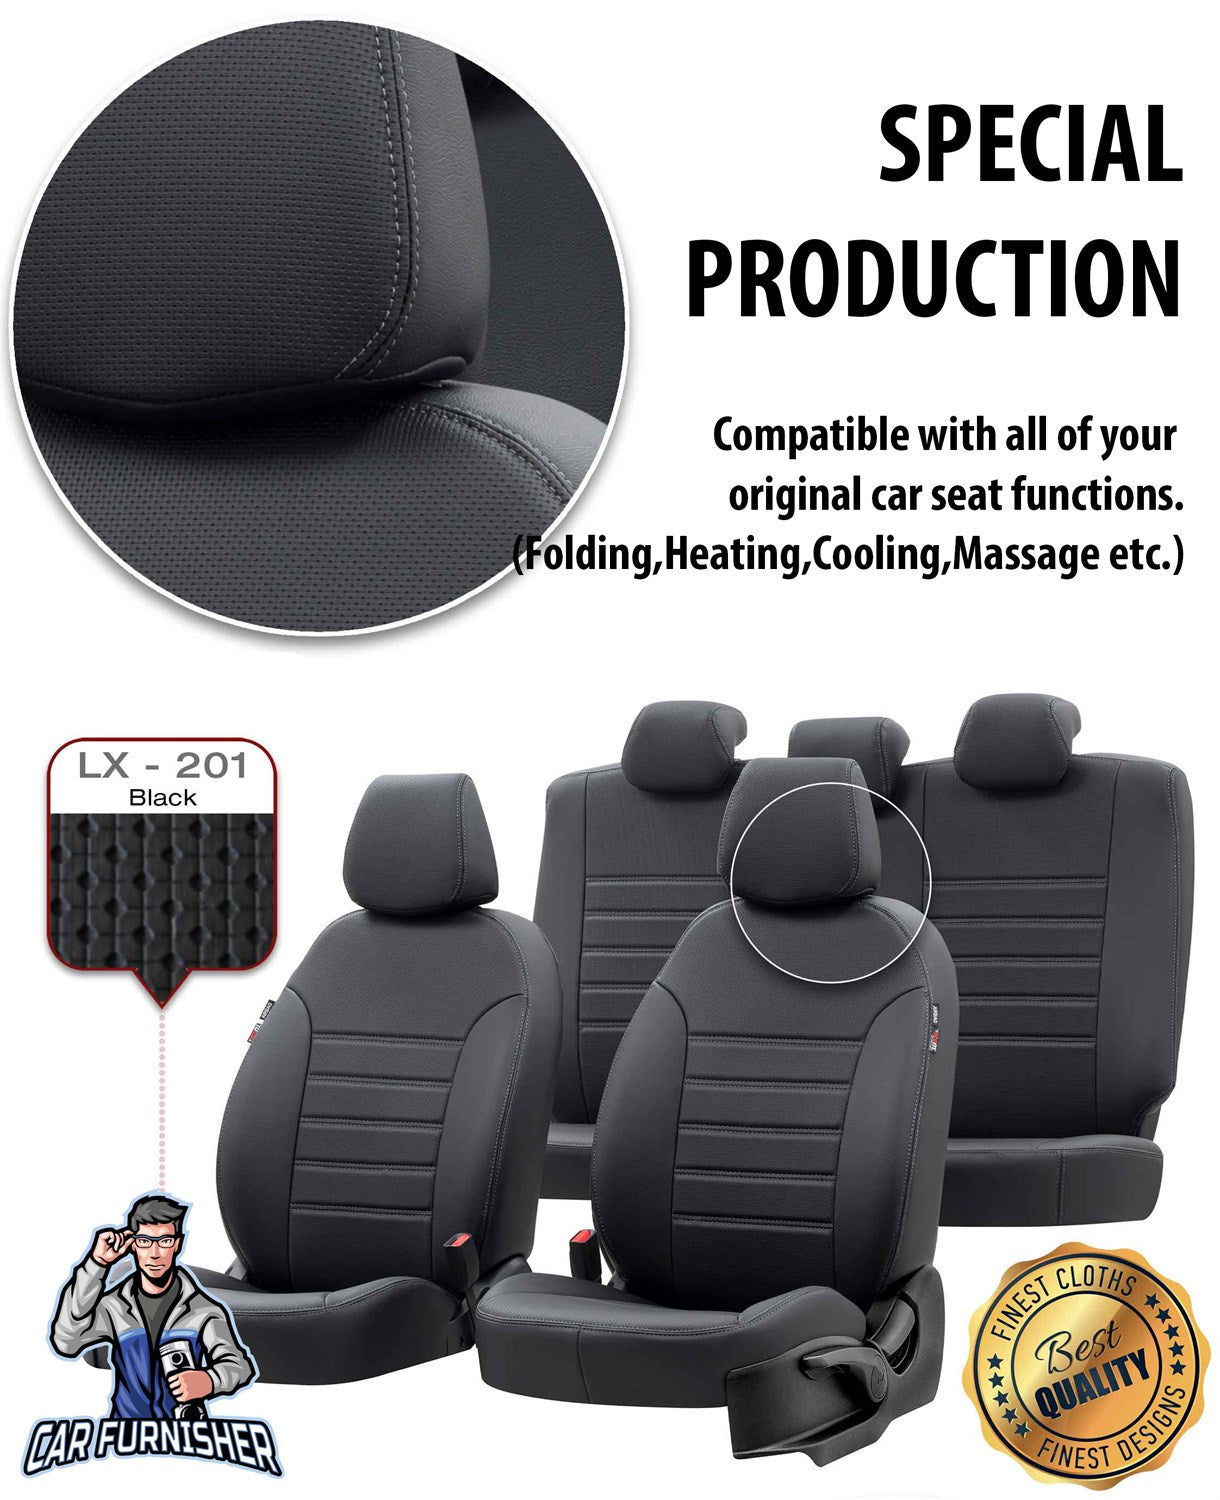 Renault Clio Seat Covers New York Leather Design Smoked Leather